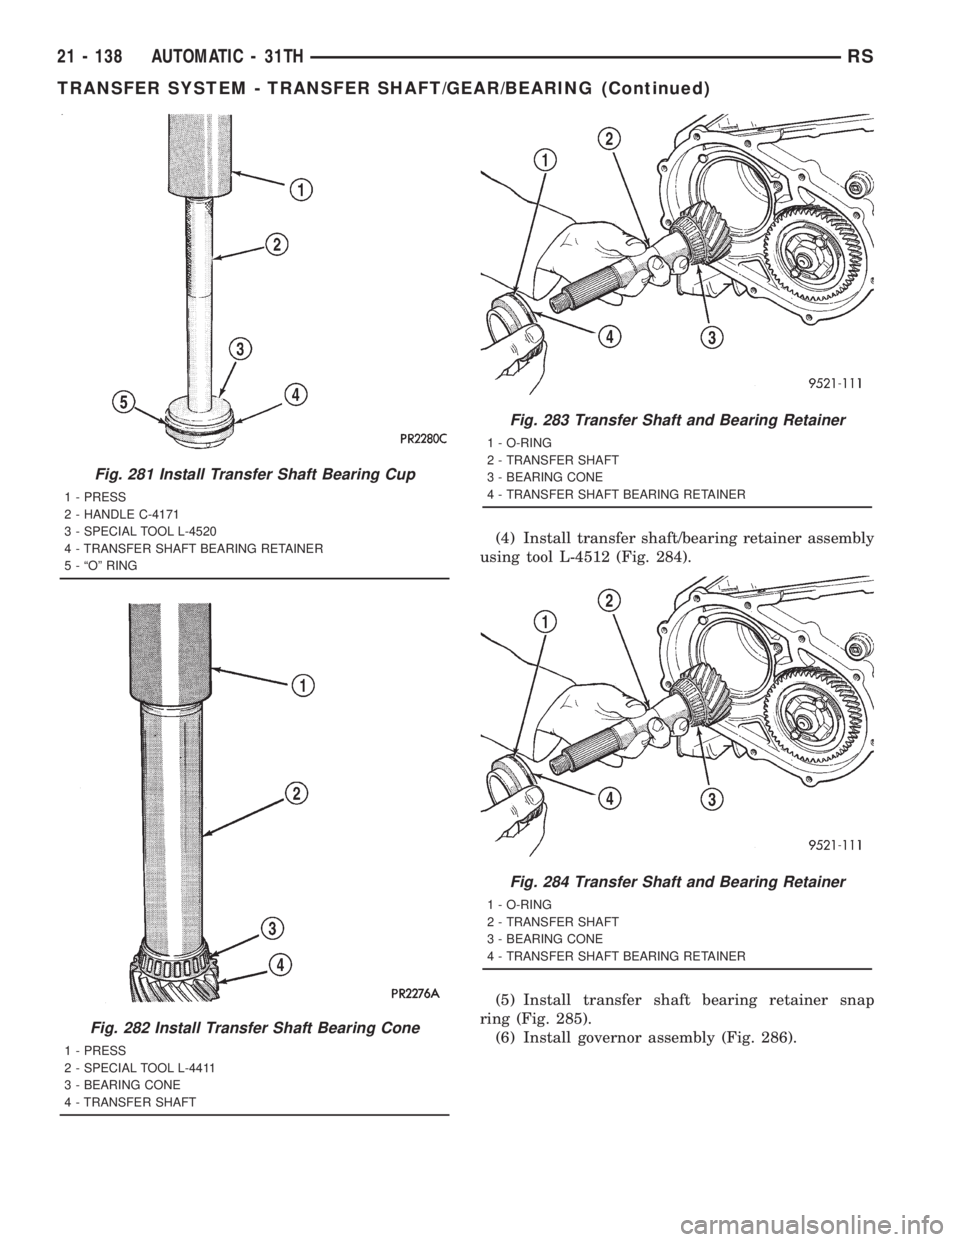 CHRYSLER VOYAGER 2001  Service Manual (4) Install transfer shaft/bearing retainer assembly
using tool L-4512 (Fig. 284).
(5) Install transfer shaft bearing retainer snap
ring (Fig. 285).
(6) Install governor assembly (Fig. 286).
Fig. 281 